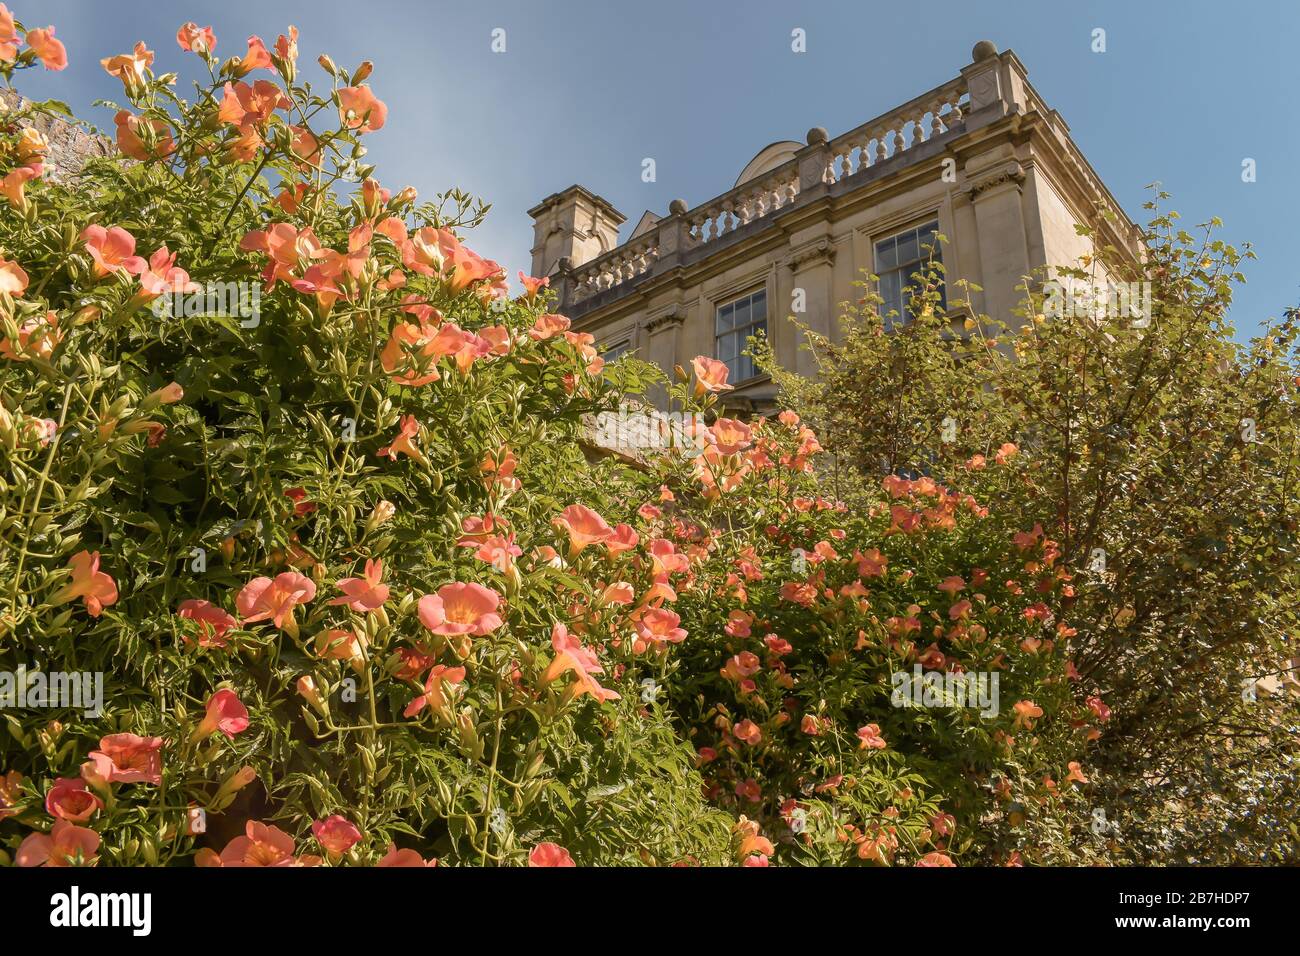 Chapel surrounded by flowers in summer, Cambridge, Cambridgeshire, United Kingdom Stock Photo